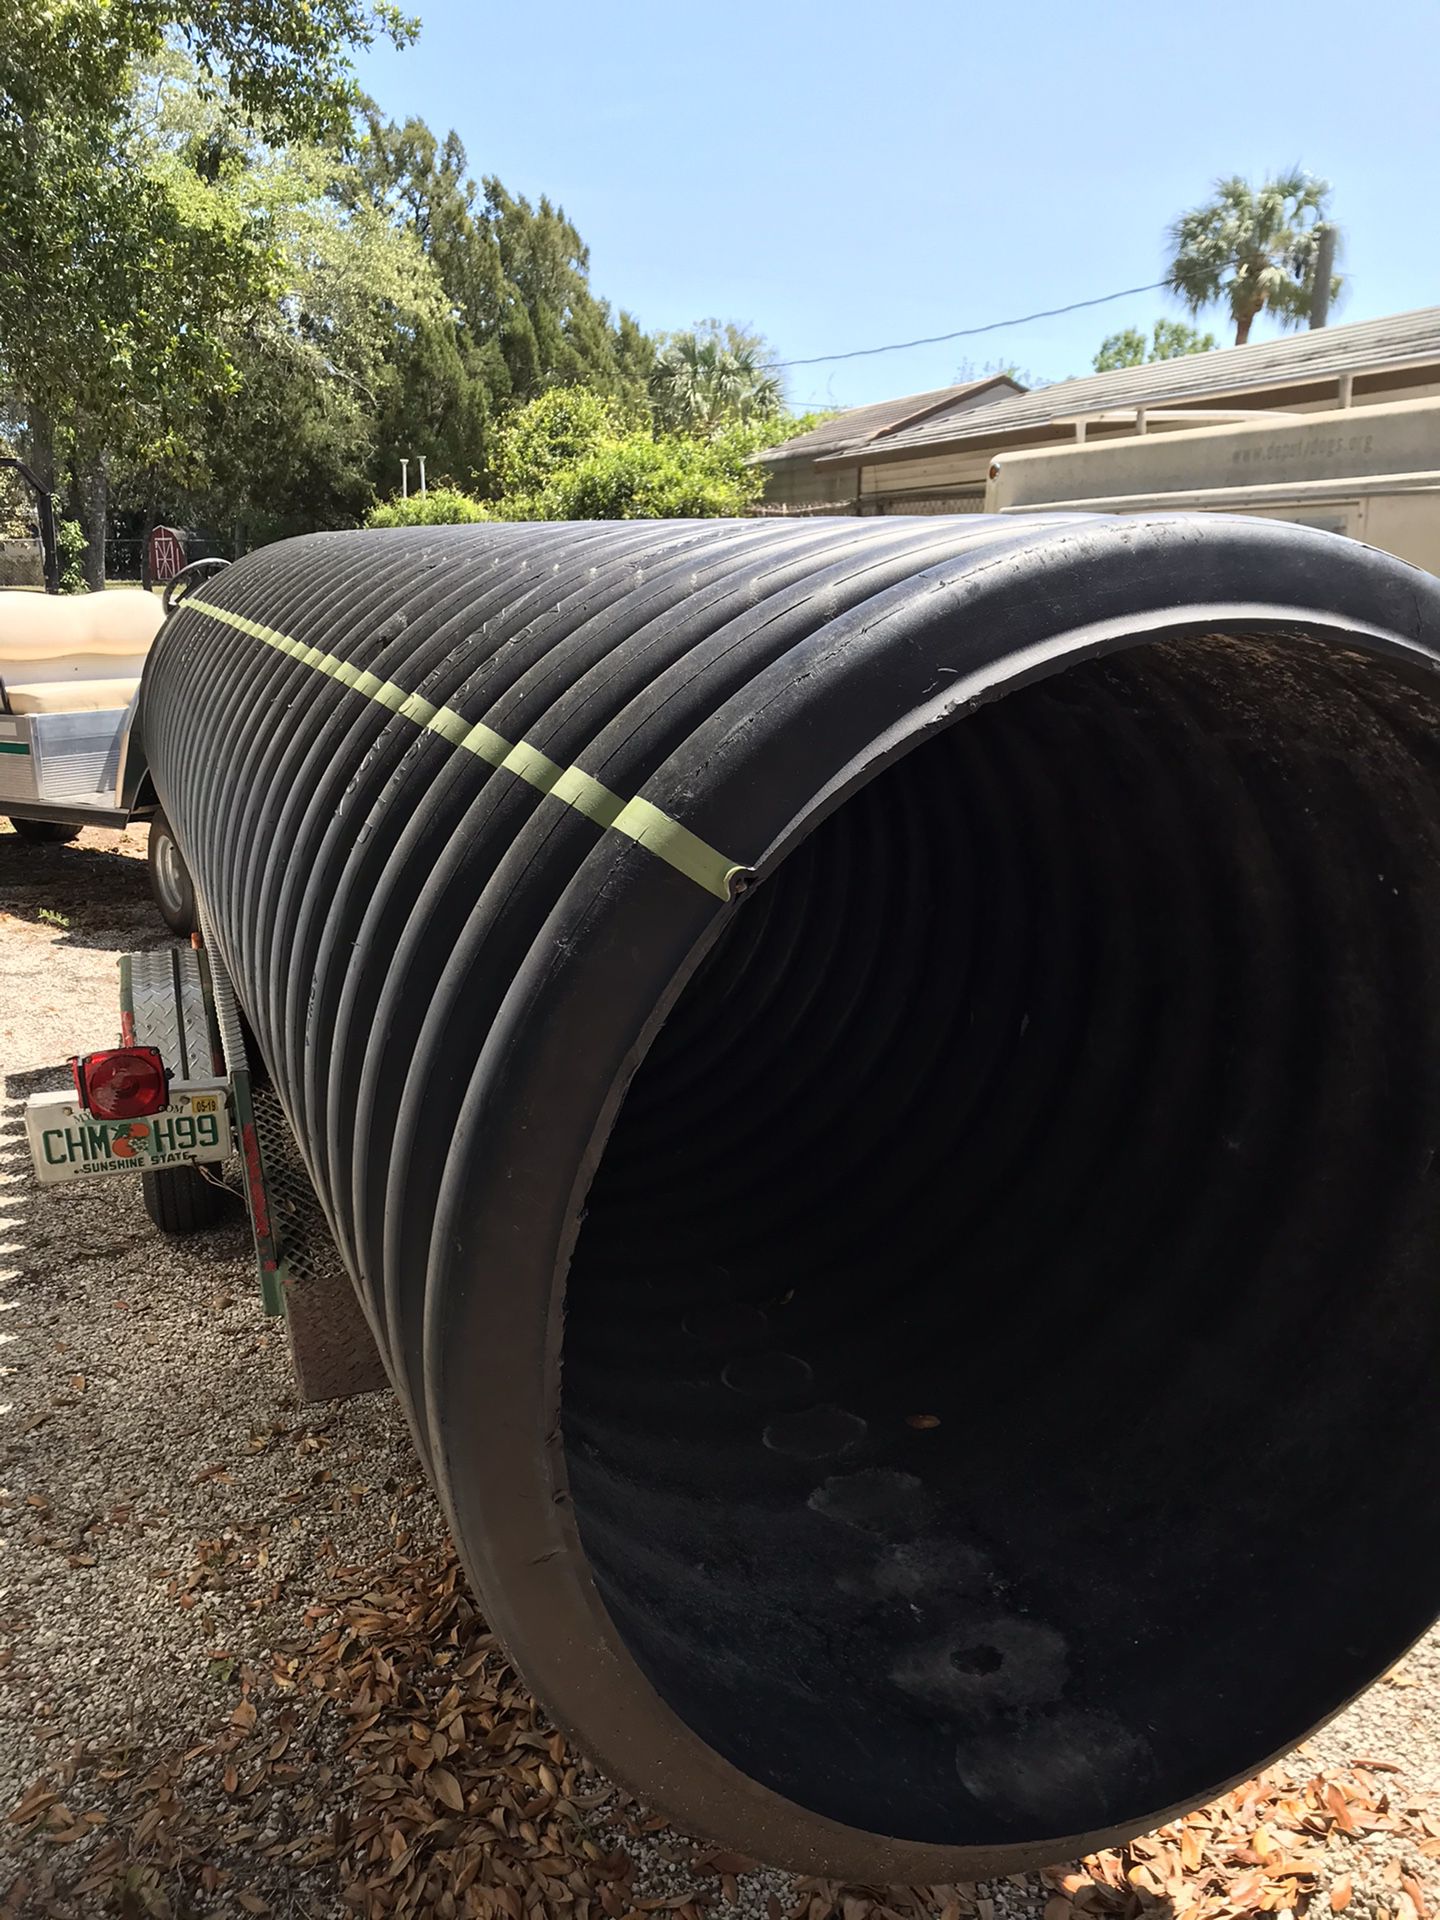 HDPE Culvert Pipe new, 36” dia x 12 ft. ADS